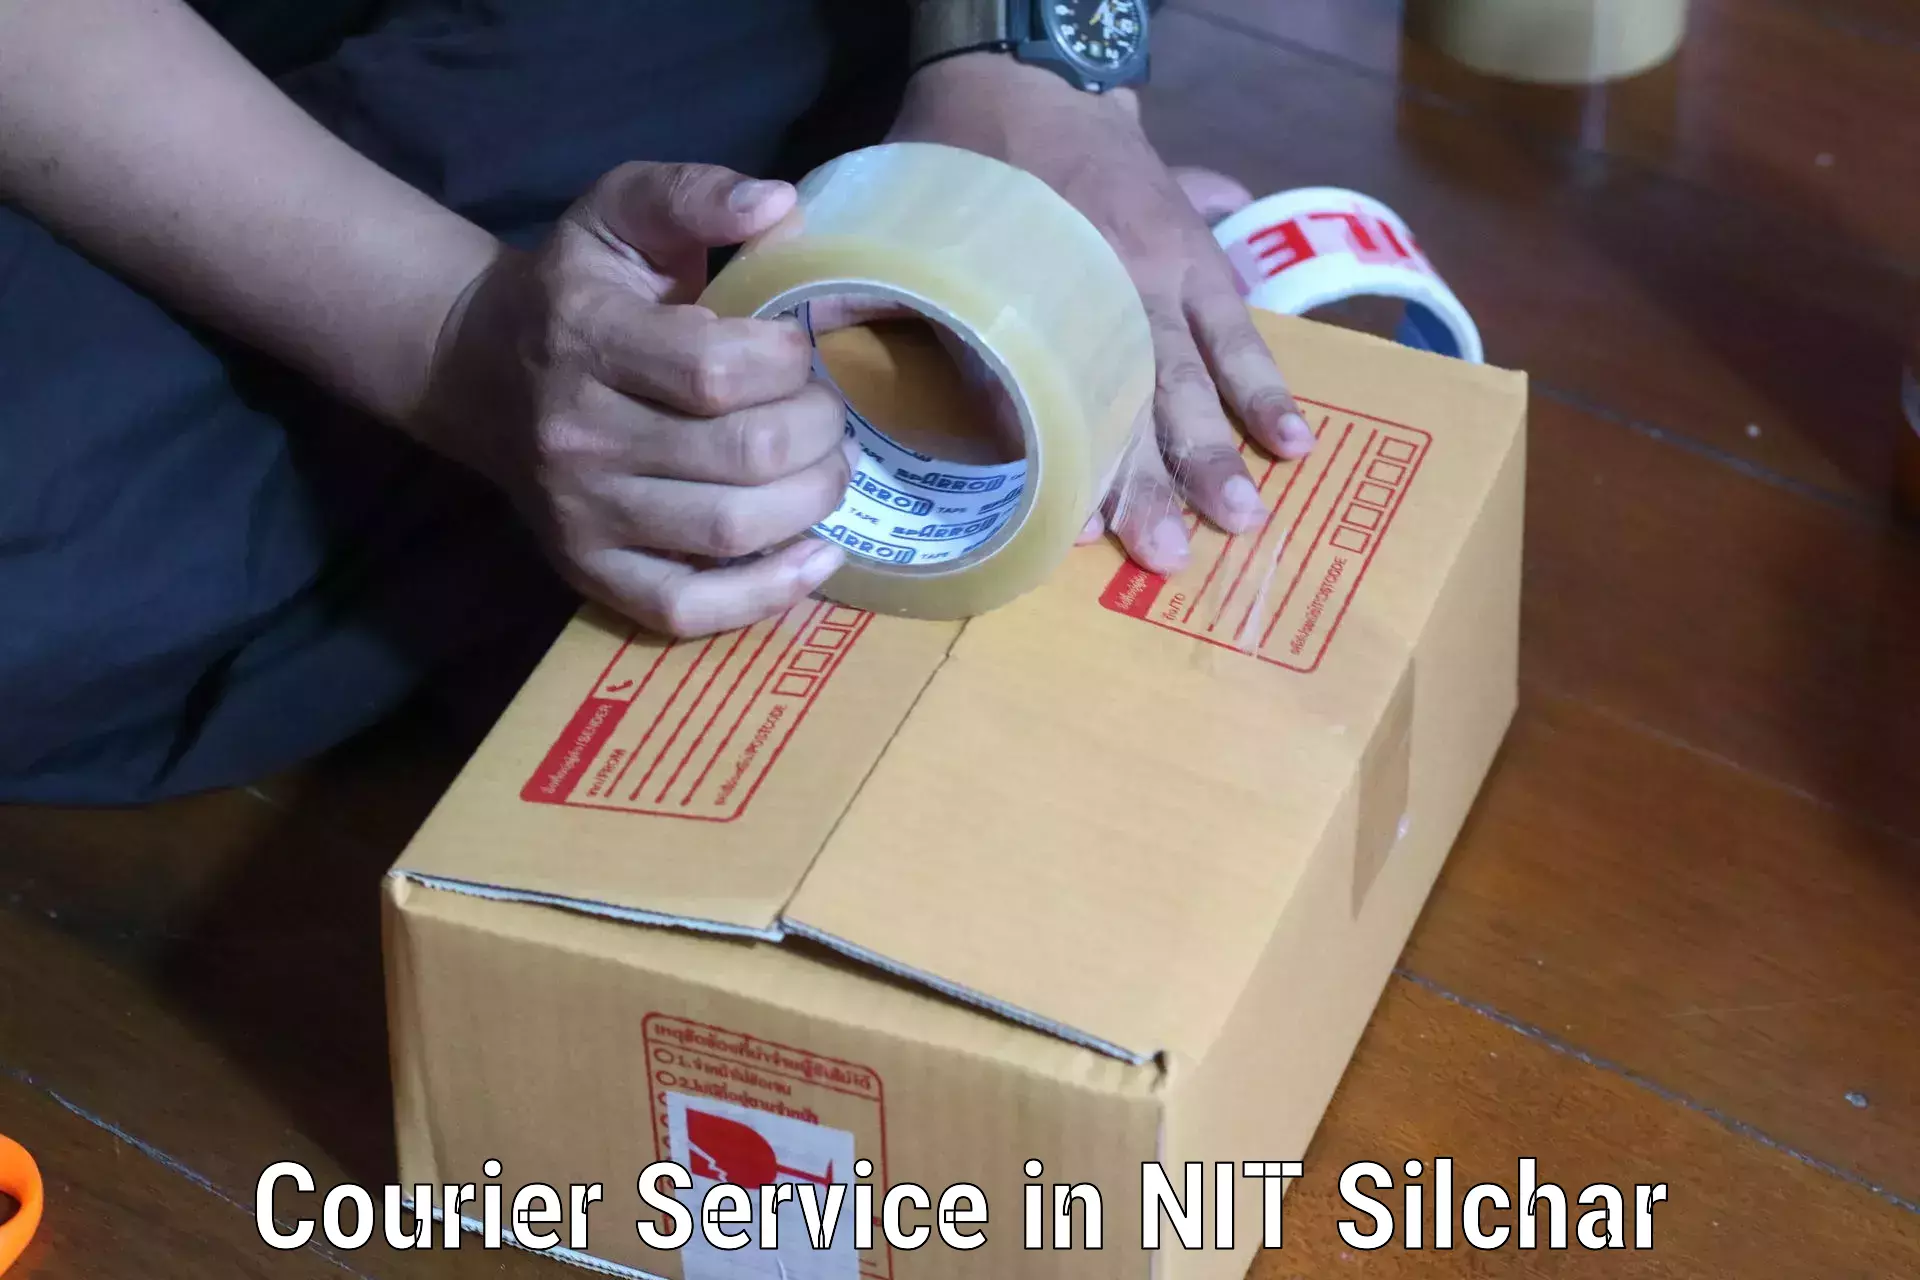 On-call courier service in NIT Silchar